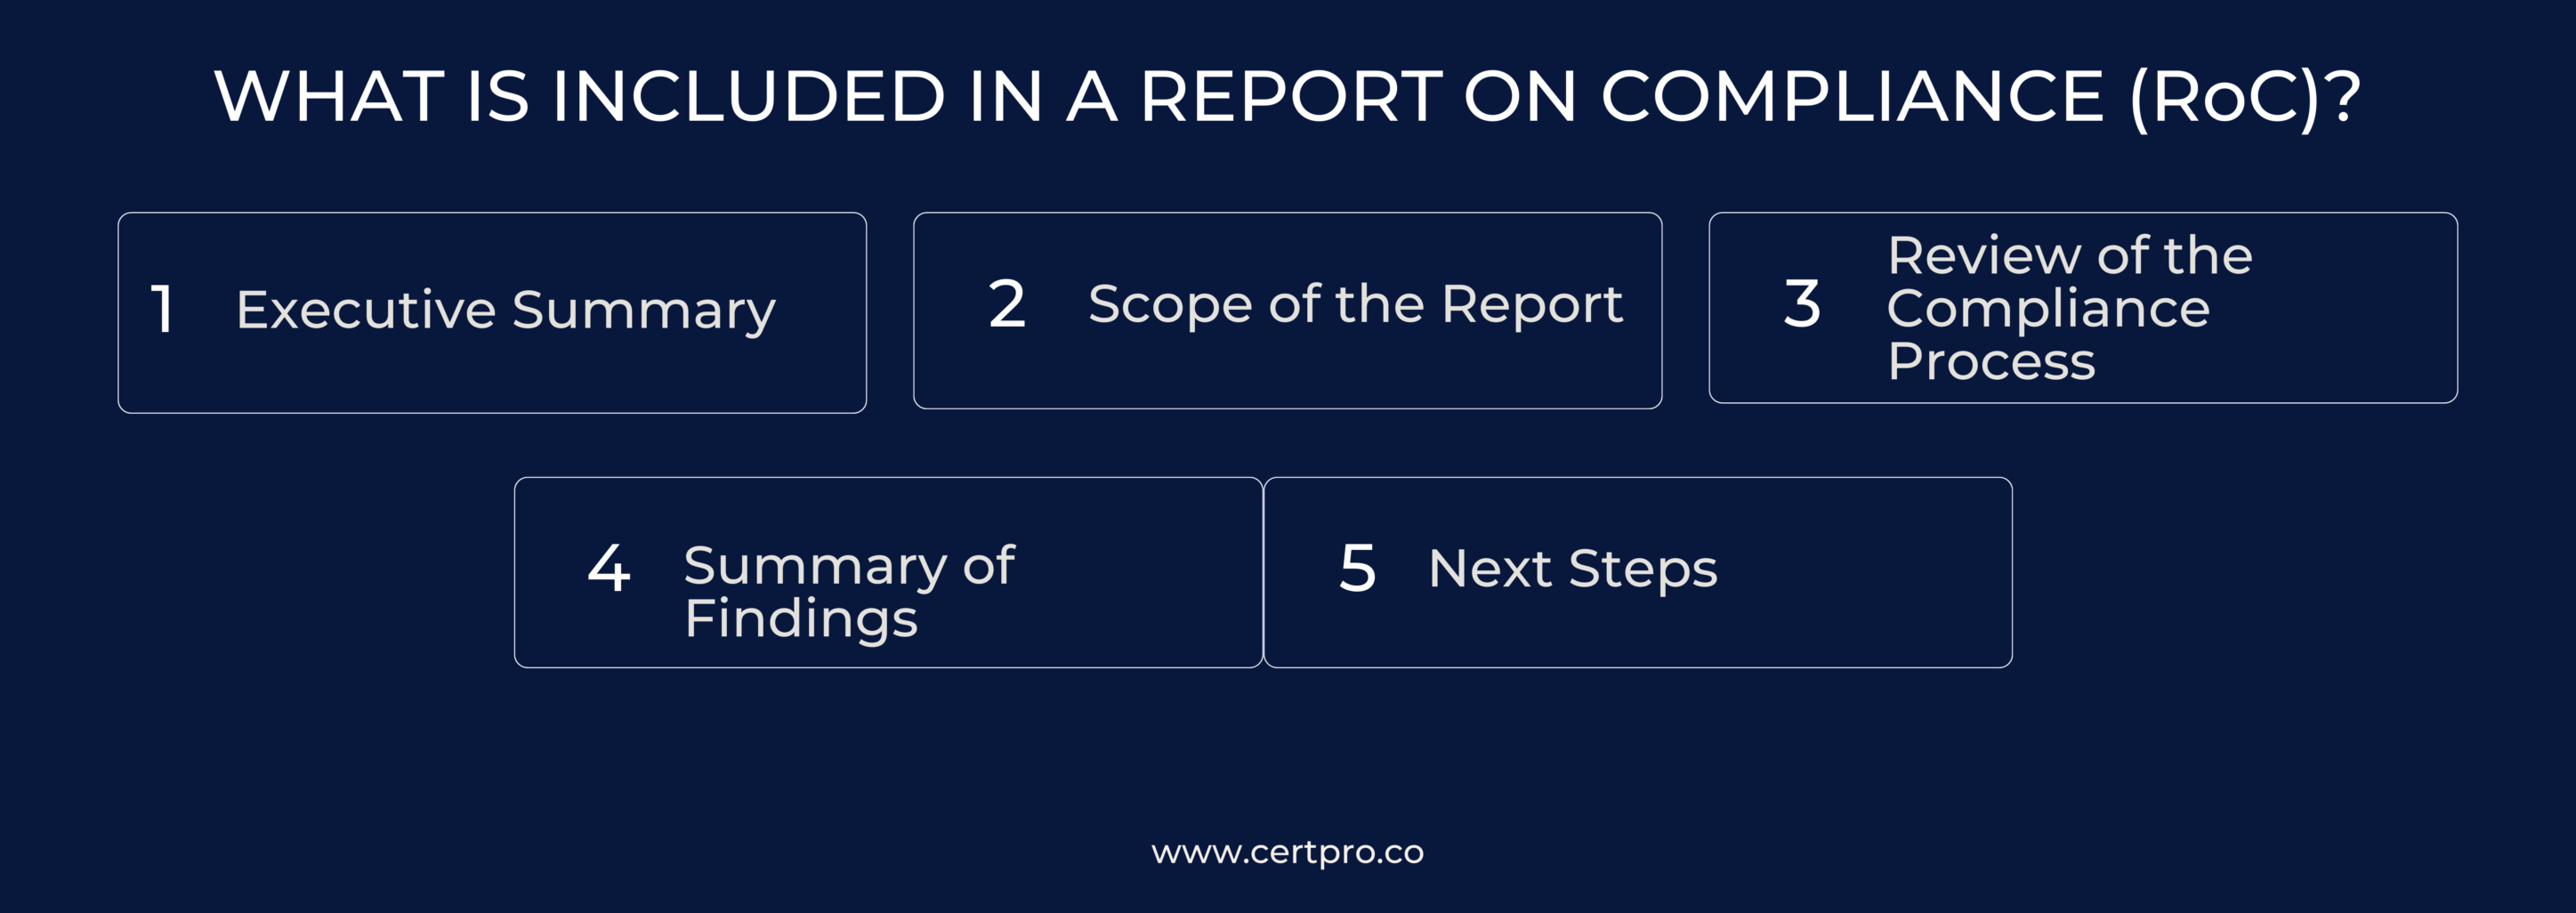 WHAT IS INCLUDED IN A REPORT ON COMPLIANCE (RoC)